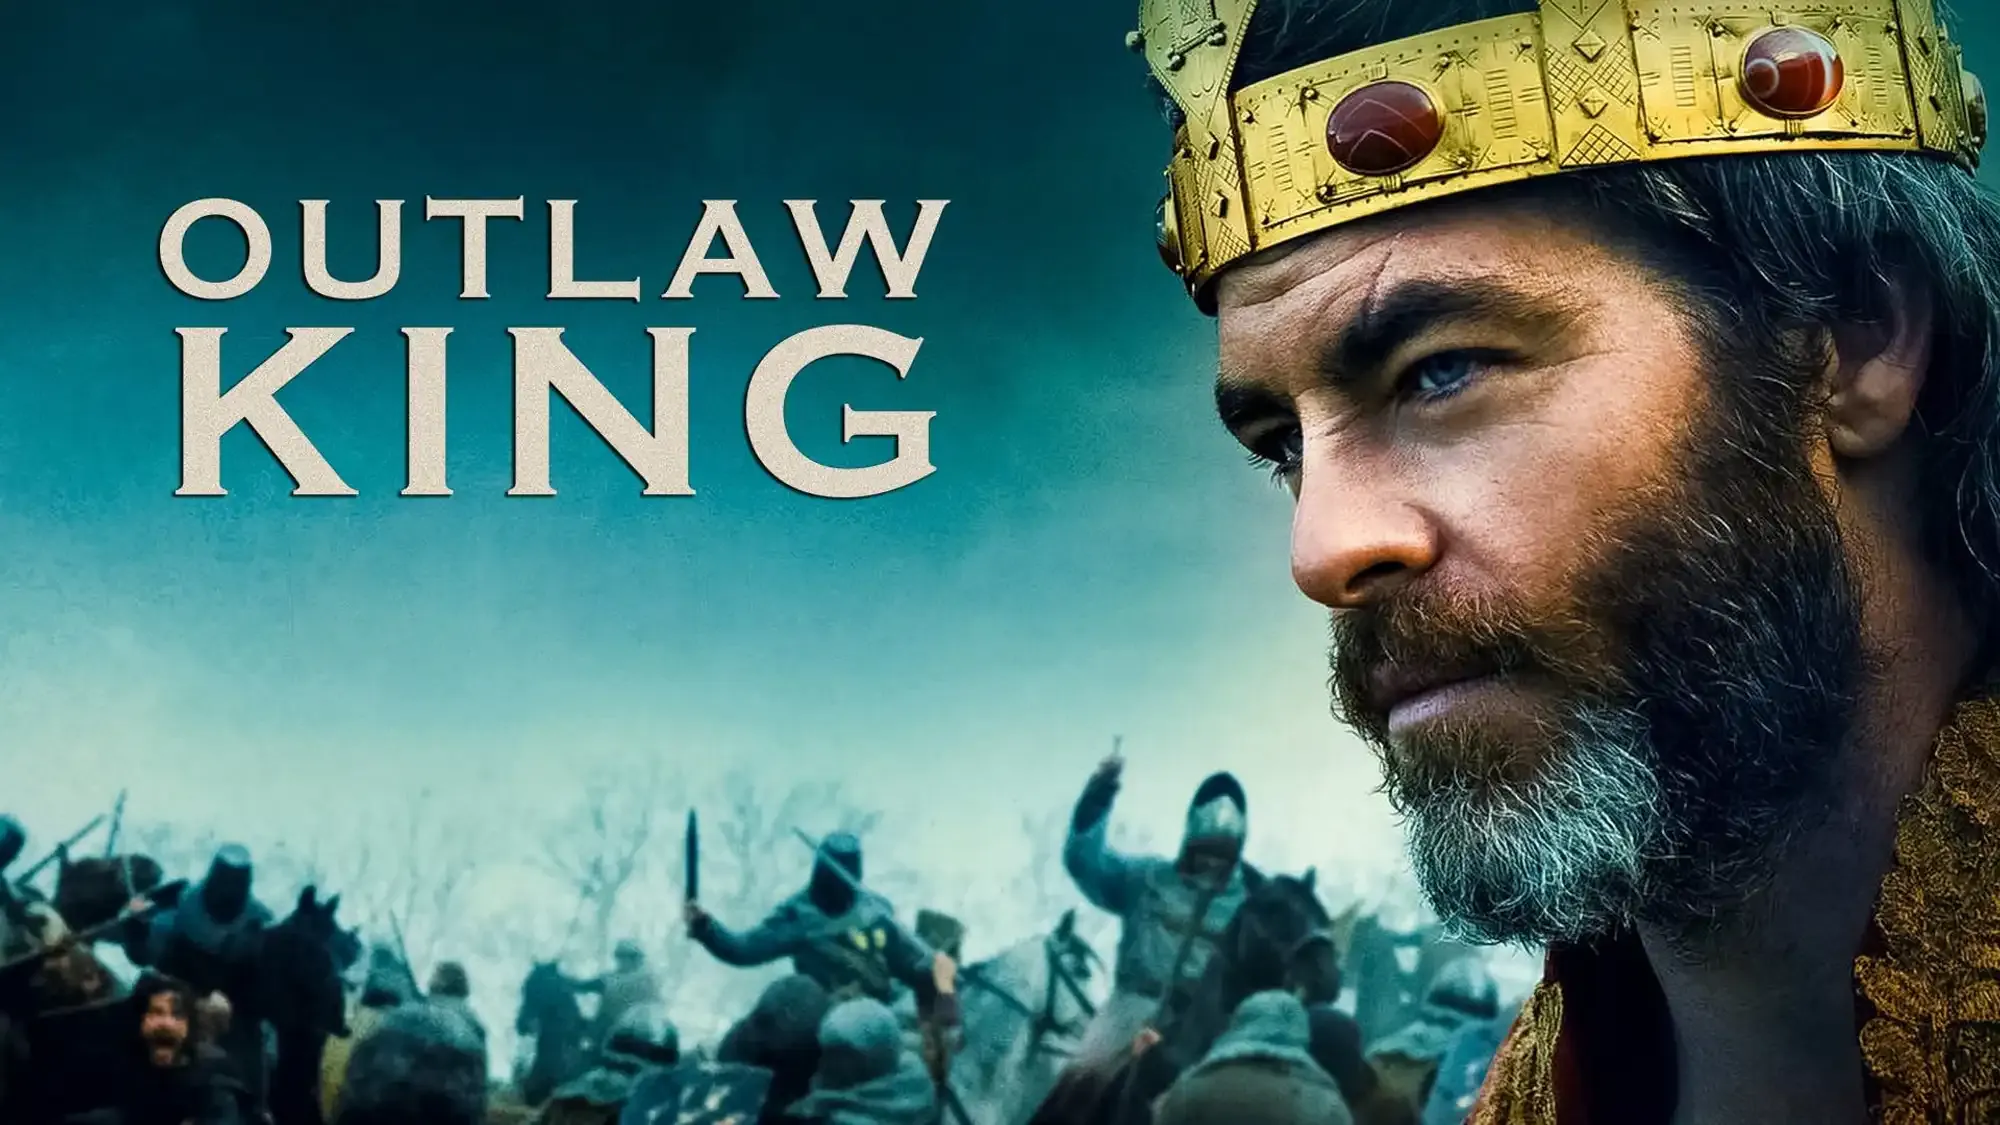 Outlaw King movie review